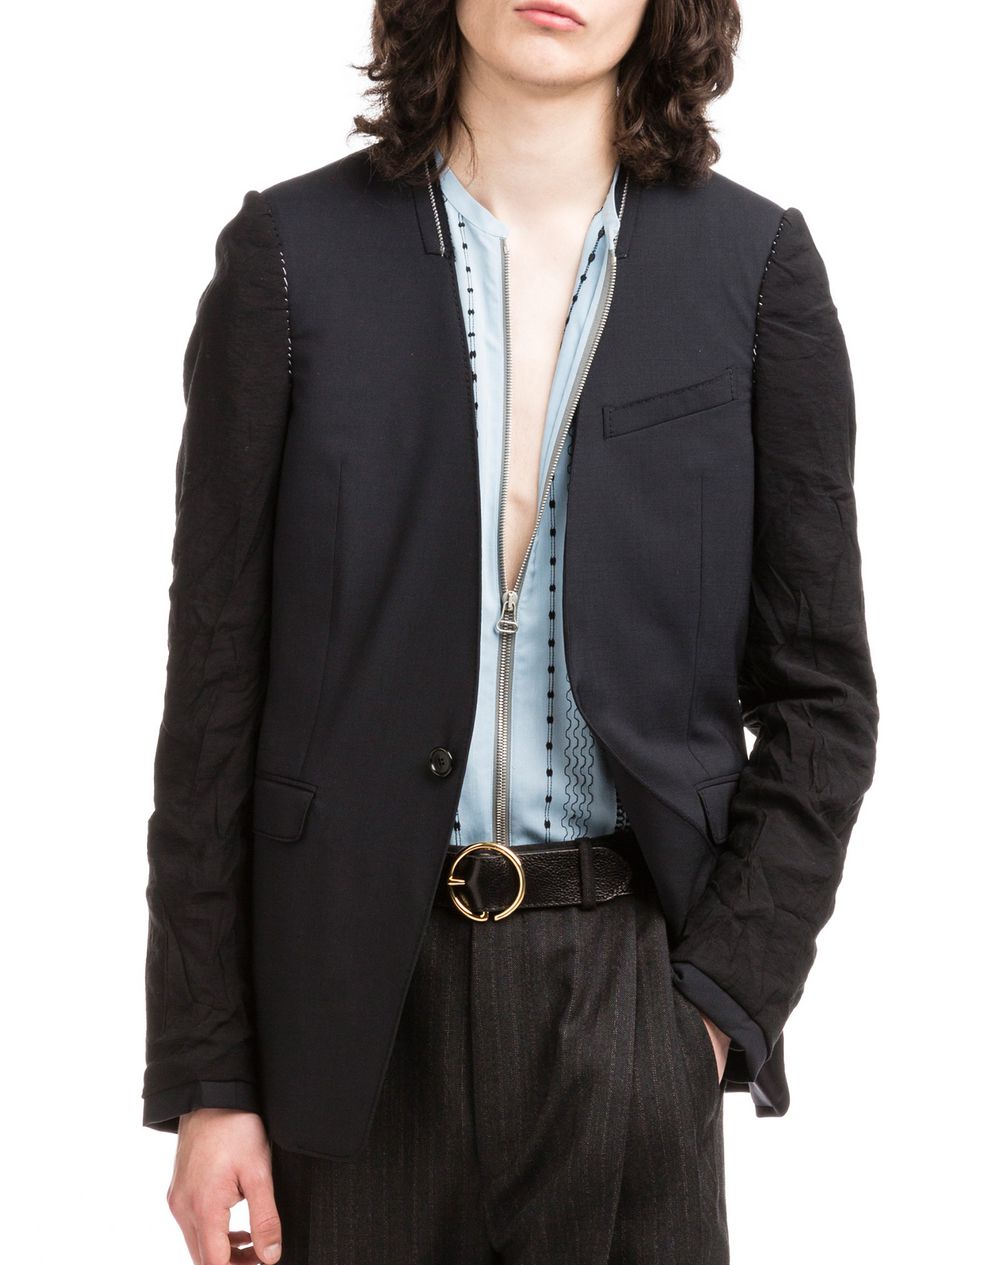 tailored jacket mens